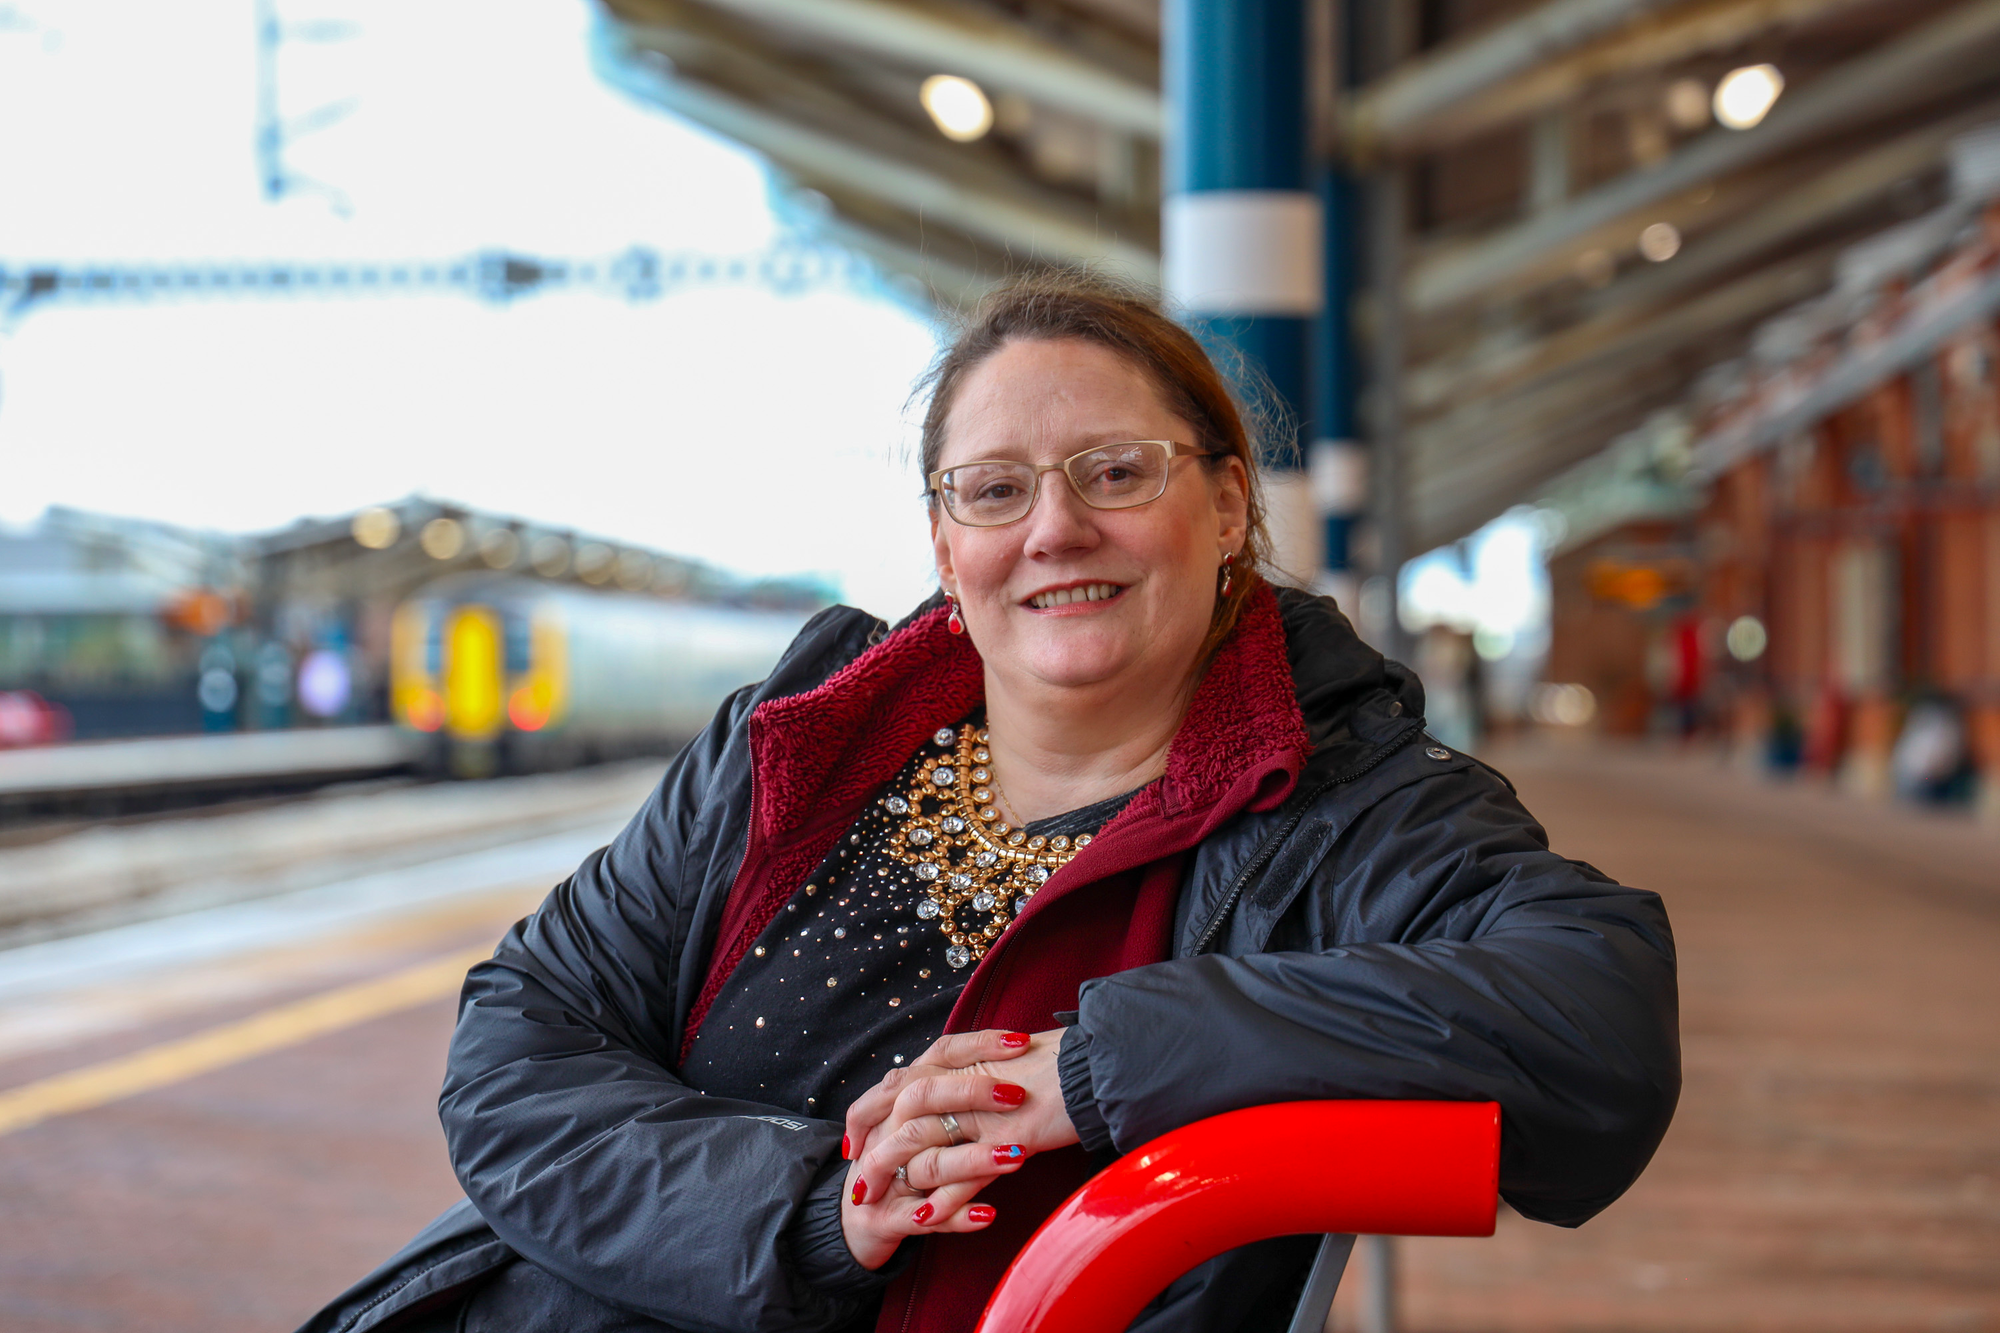 Chaplain Karen, pictured smiling at the camera whilst sitting on a platform bench.